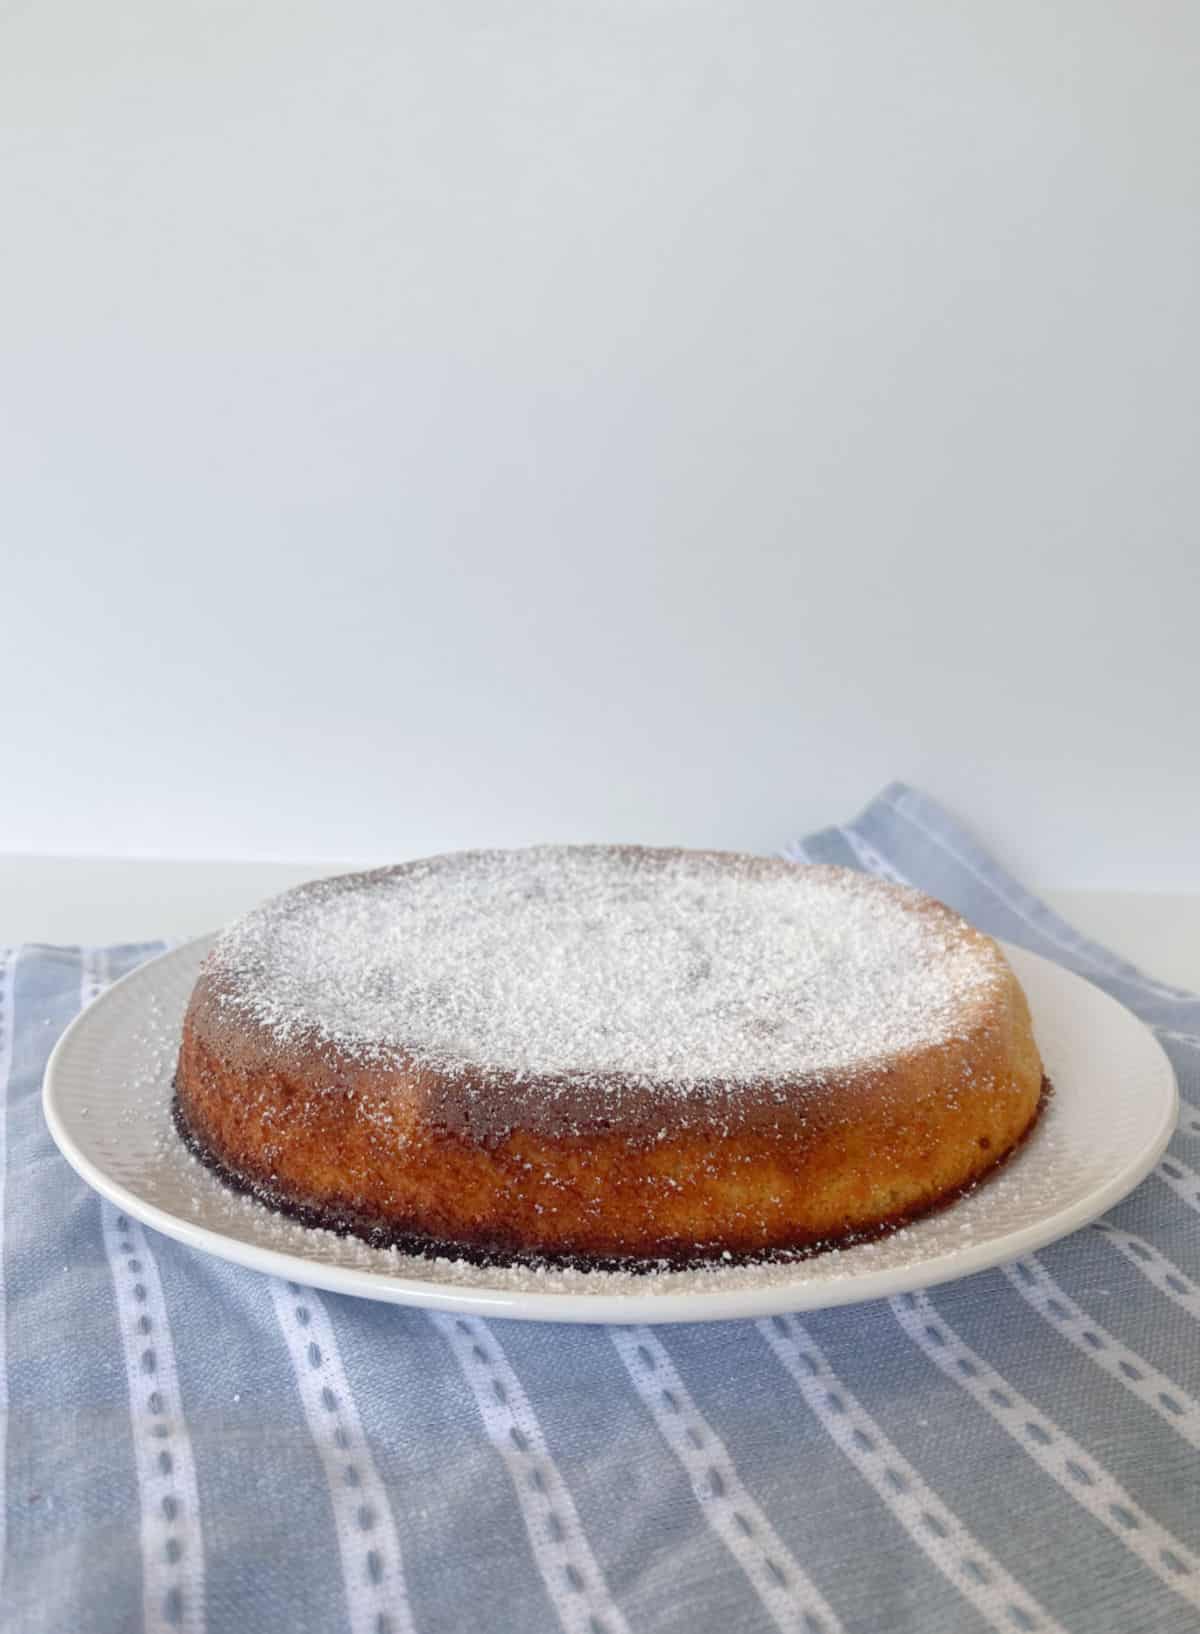 Side view of Whole Orange Cake dusted with icing sugar sitting on a white plate.